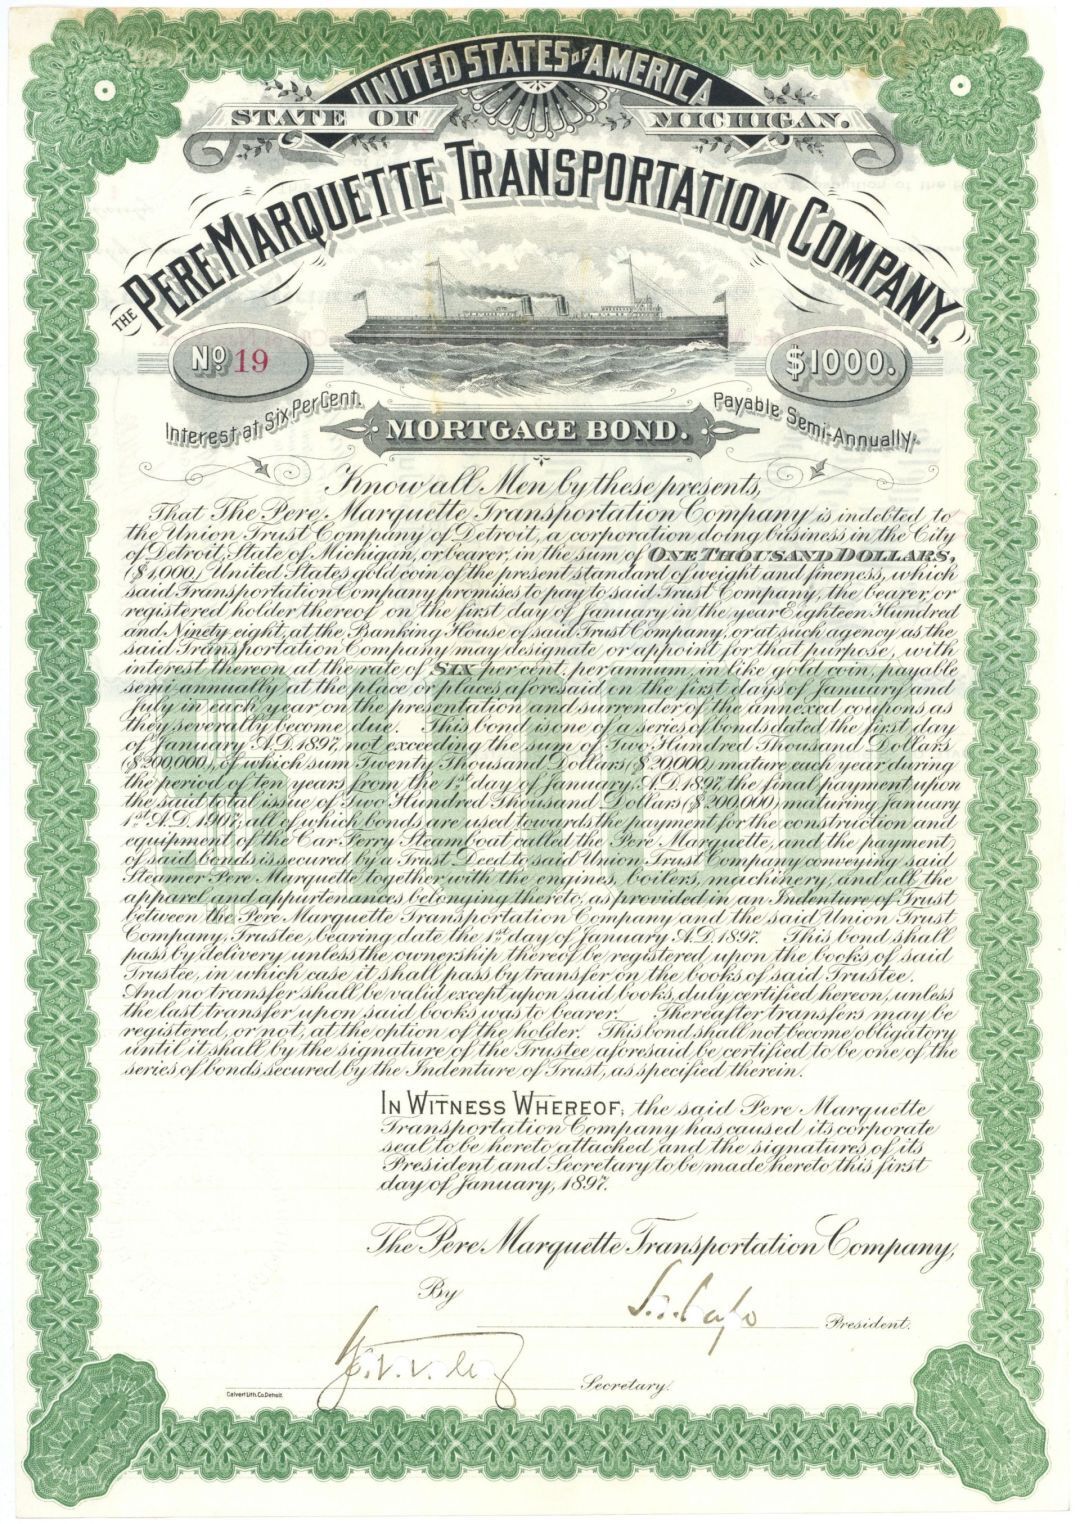 Pere Marquette Transportation Co. - 1897 dated $1,000 Shipping Bond - Always Tri